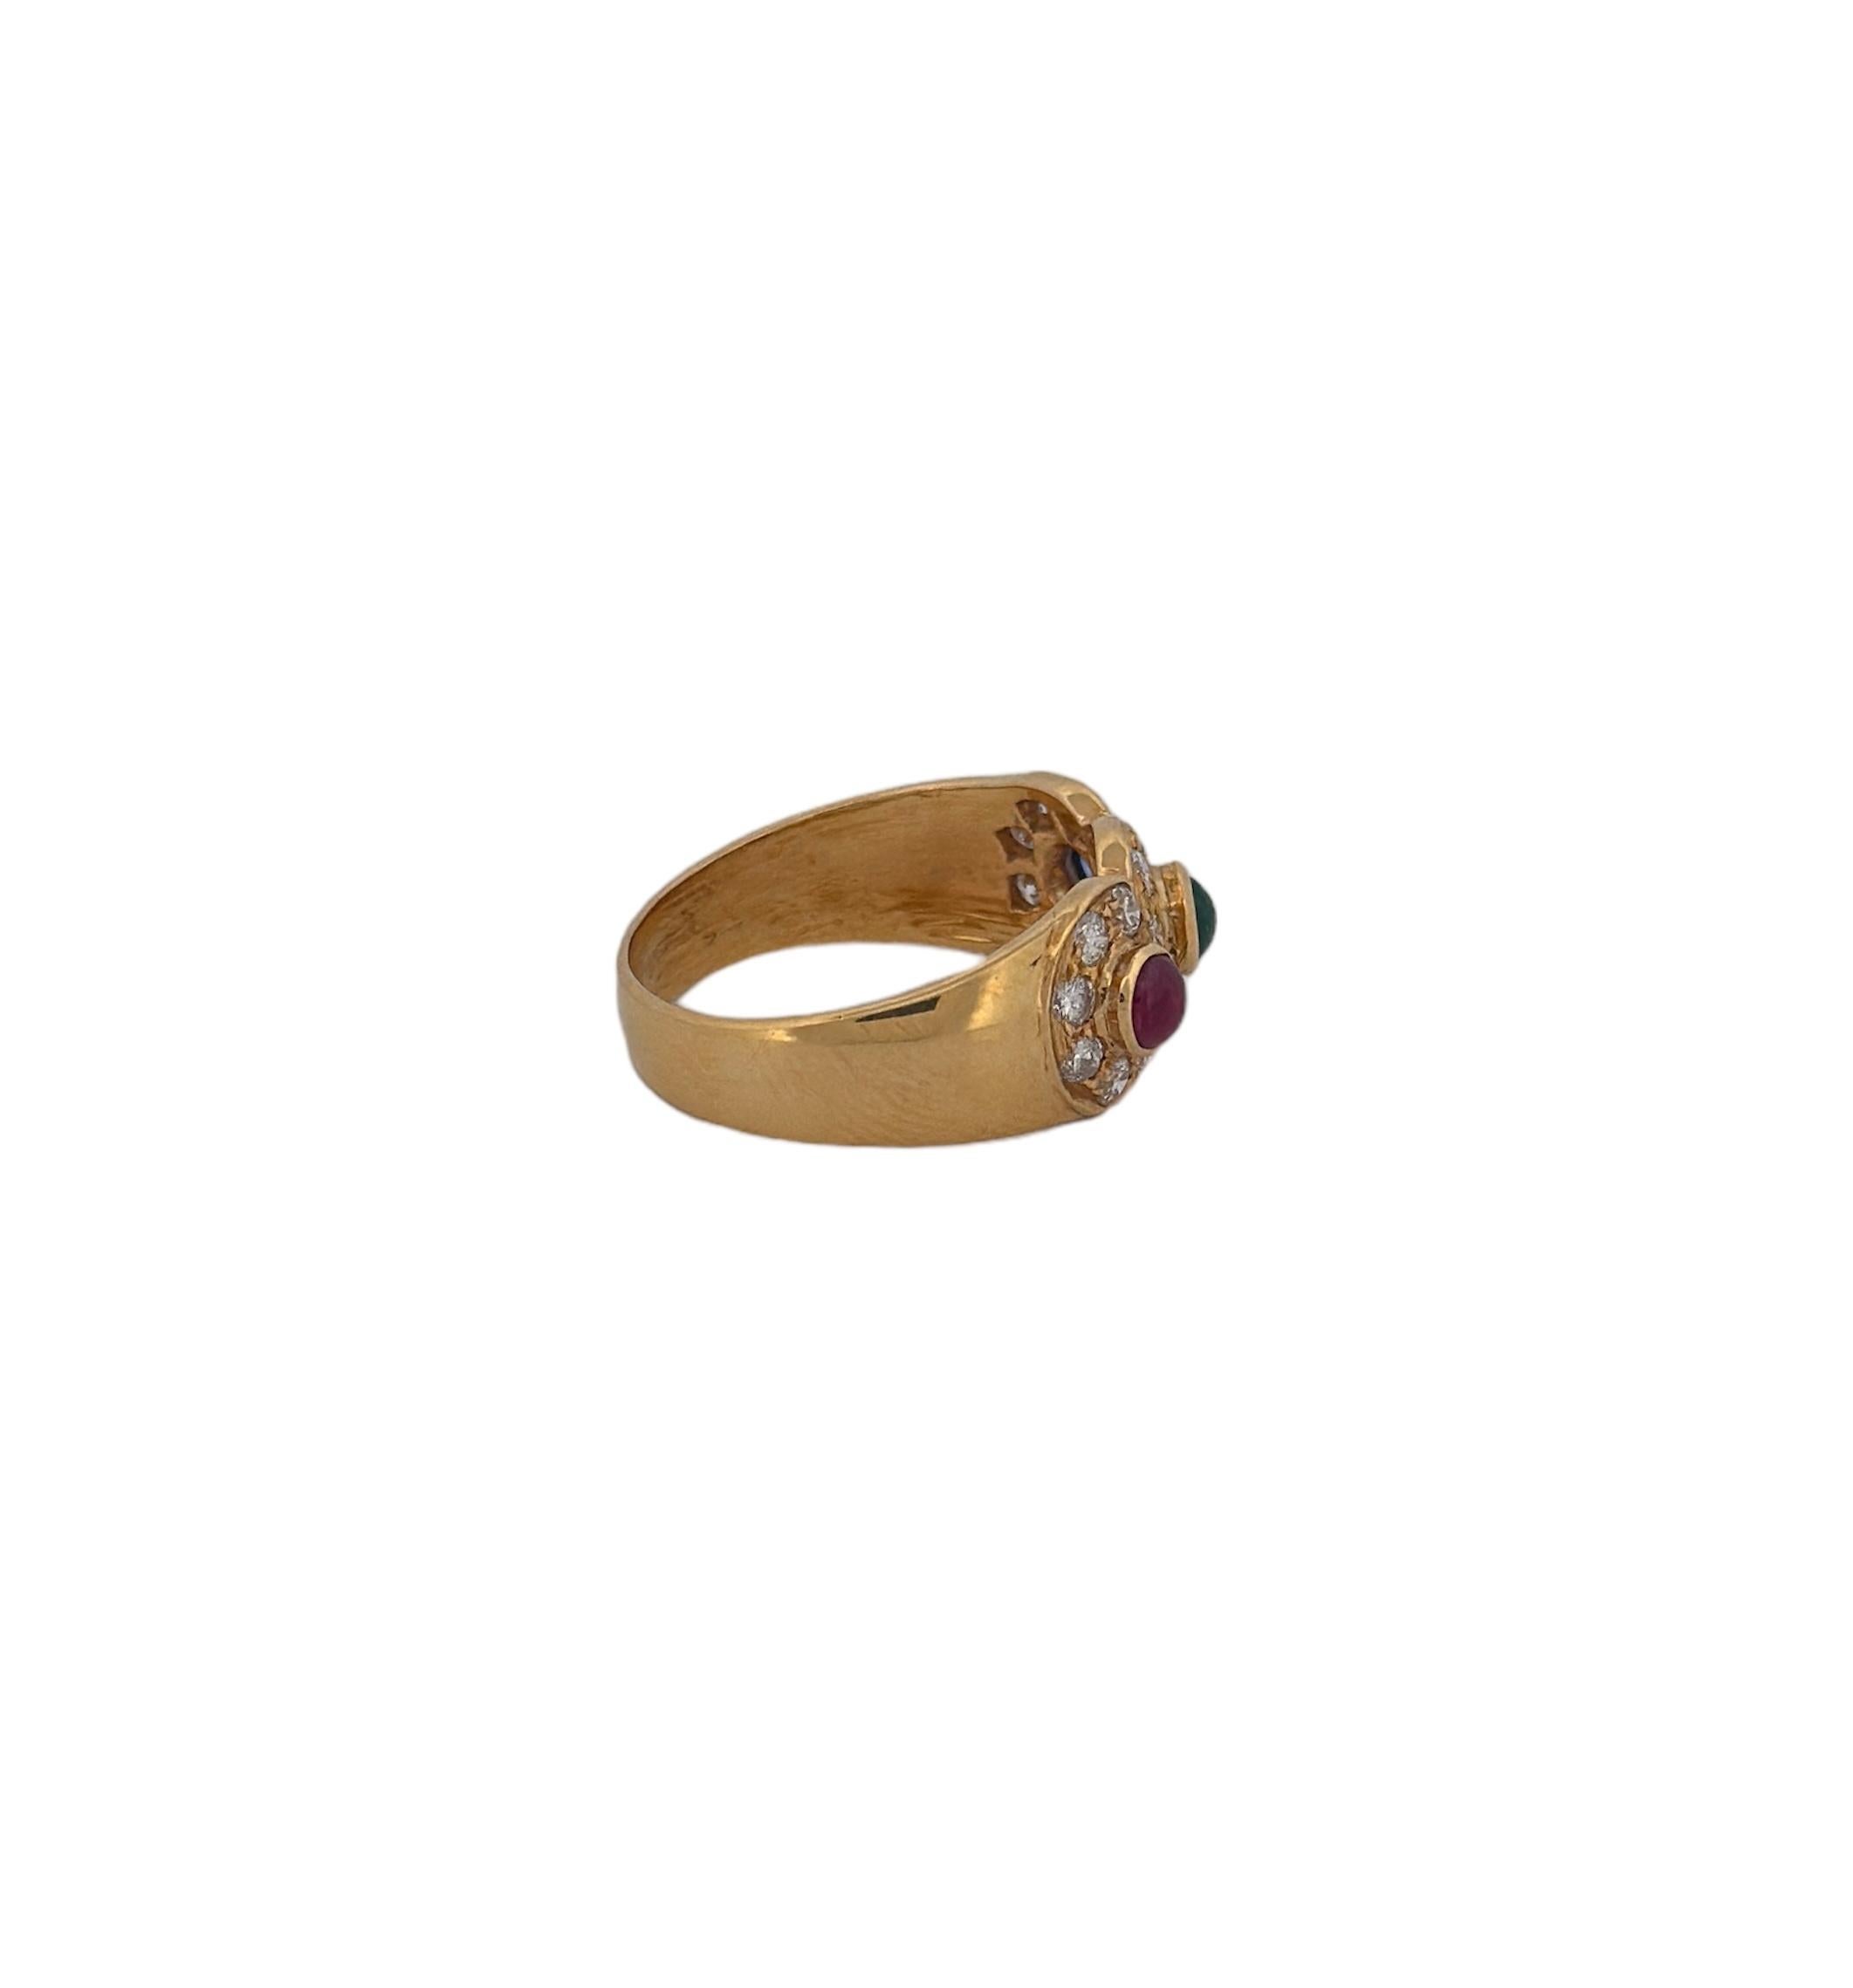 Transport yourself to the early 20th century with this truly remarkable ring, a testament to the era's unparalleled craftsmanship. Fashioned from the warm embrace of 18k yellow gold, it unveils a trinity of precious gemstones, each with its own